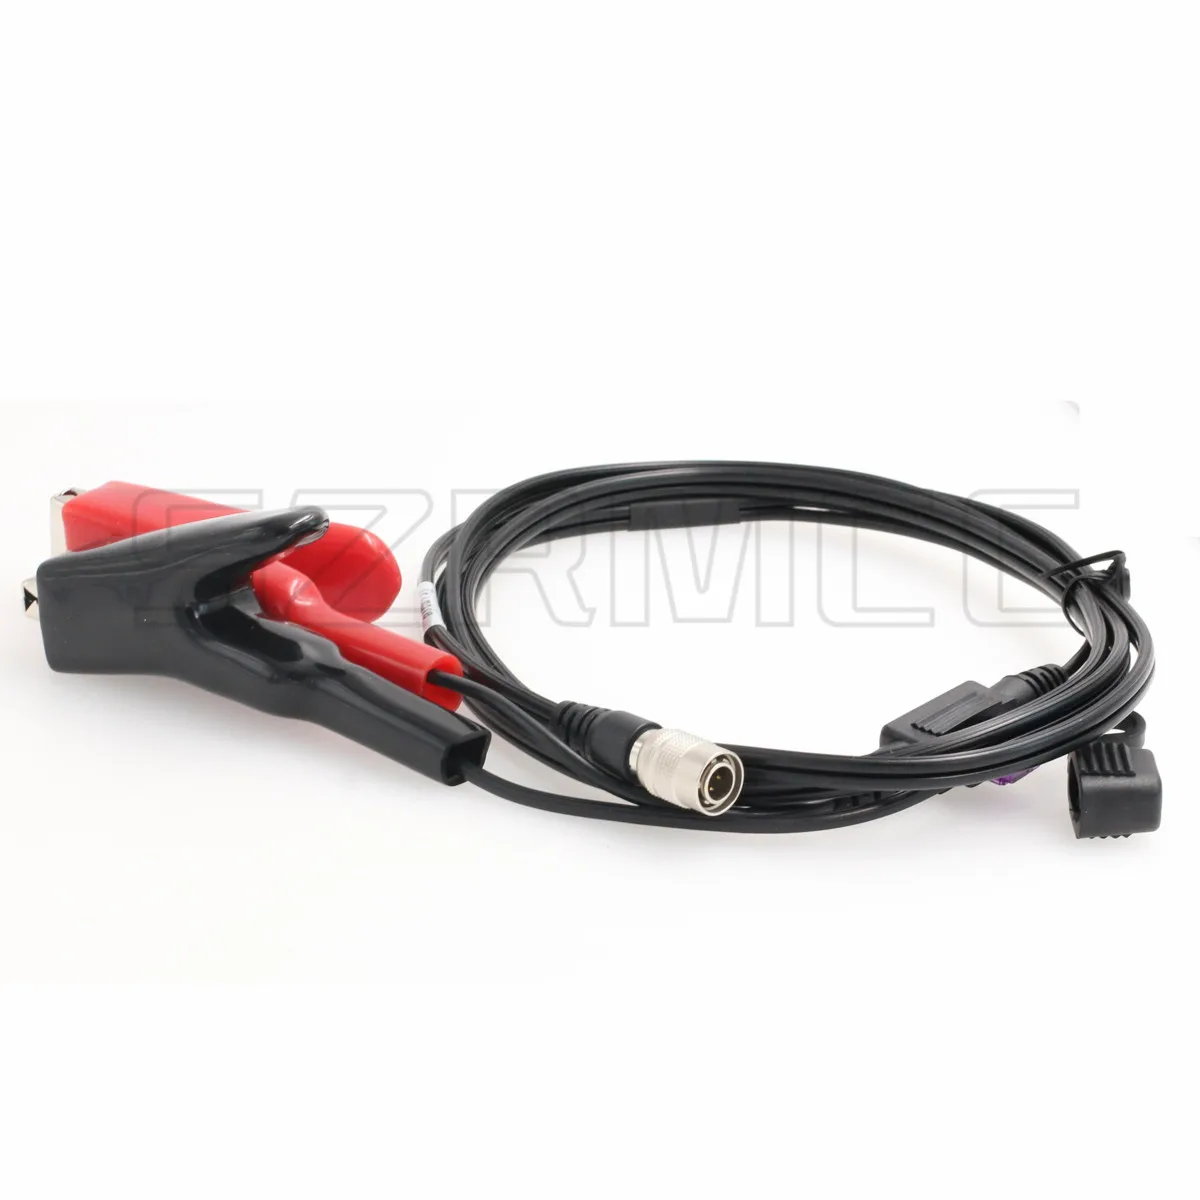 

Car Battery Alligator Clips to Hirose 4 pin Male Power Cable for Trimble 5600 Geodimeter Spectra Precision Total Station